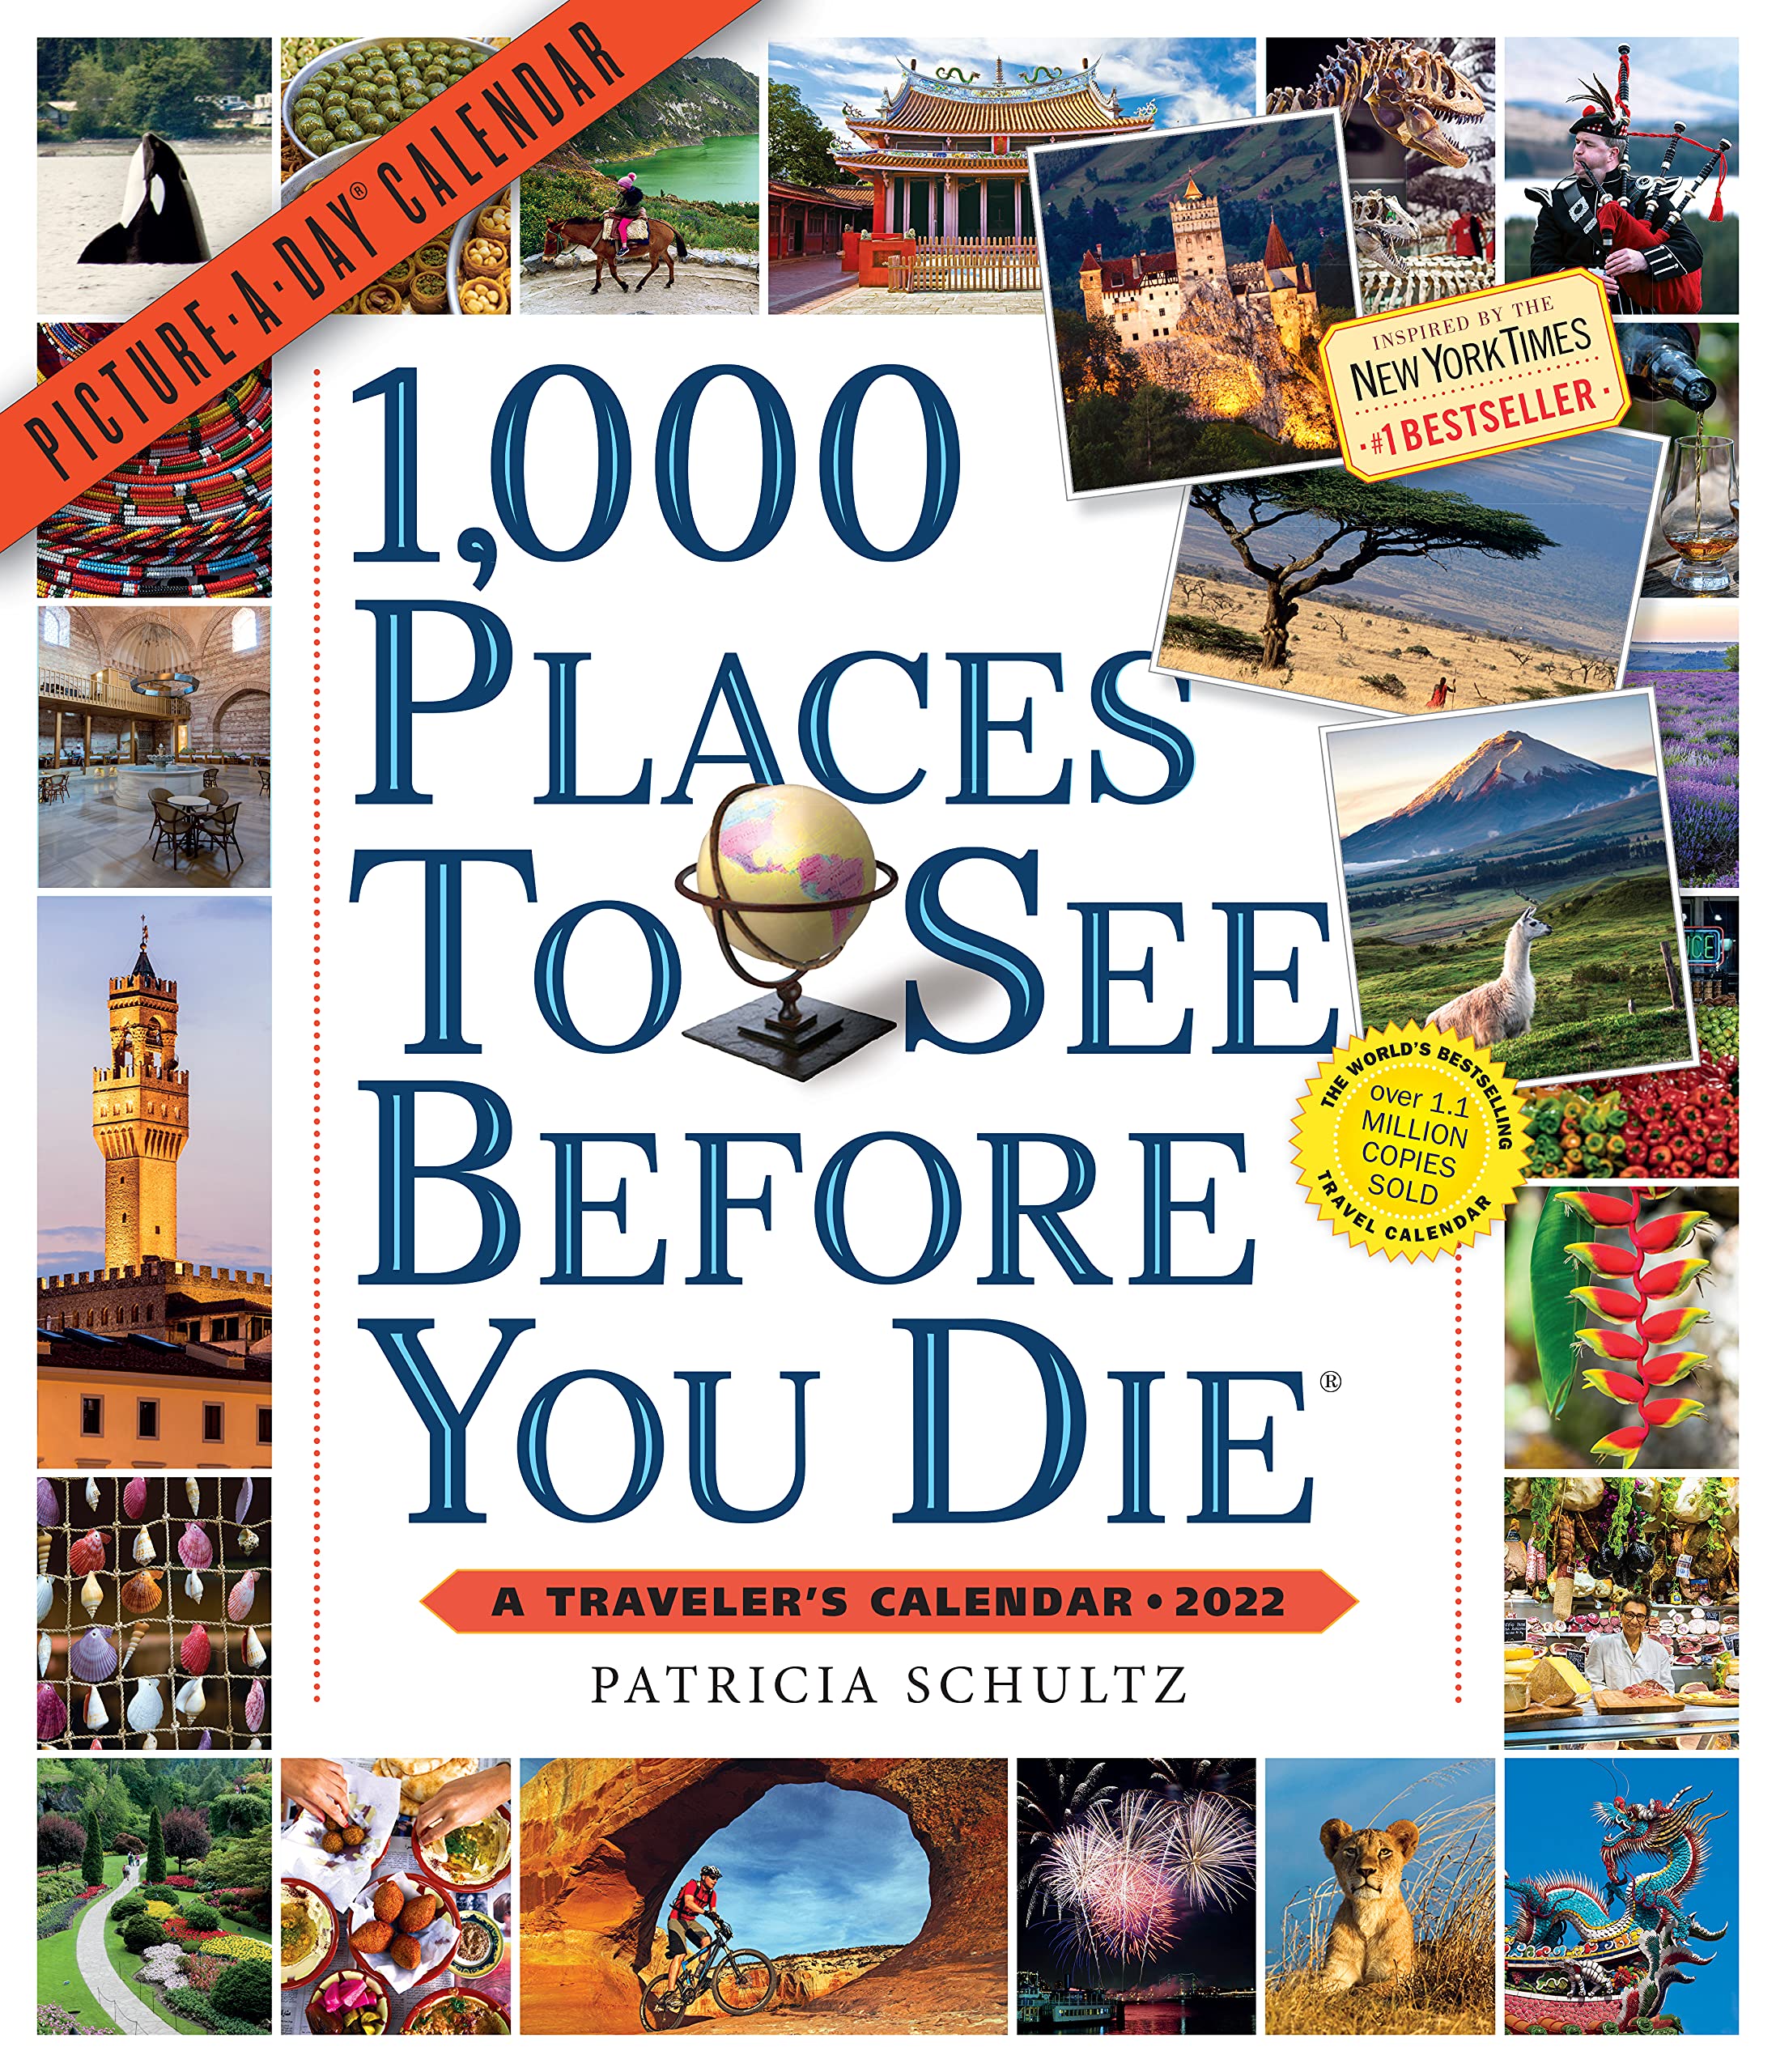 Calendar 2022 - 1000 Places to See Before You Die | Workman Publishing